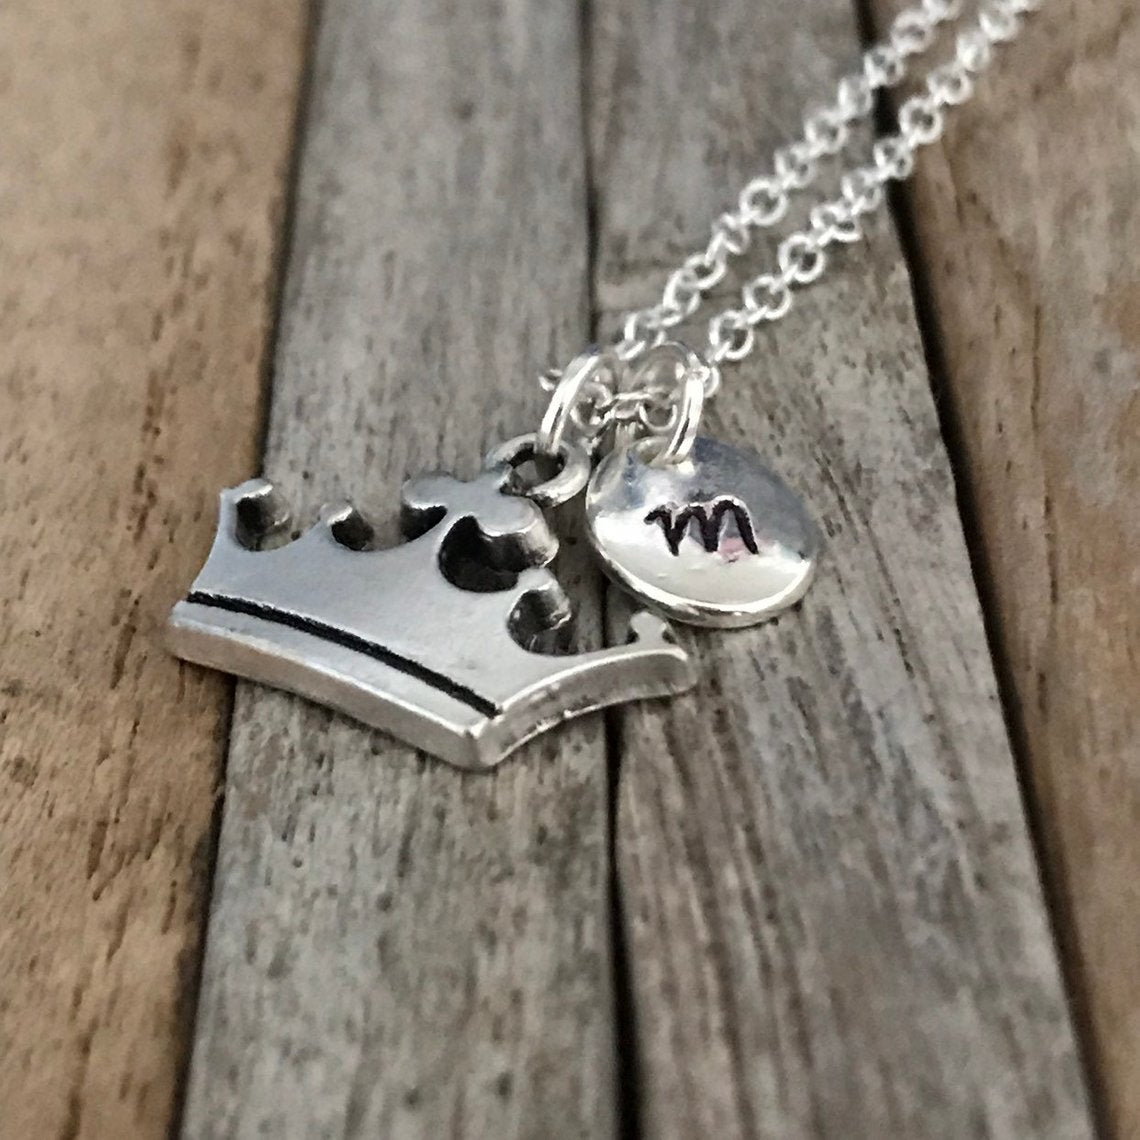 Customized crown necklace, Crown jewelry, Silver crown princess necklaces with initial charm